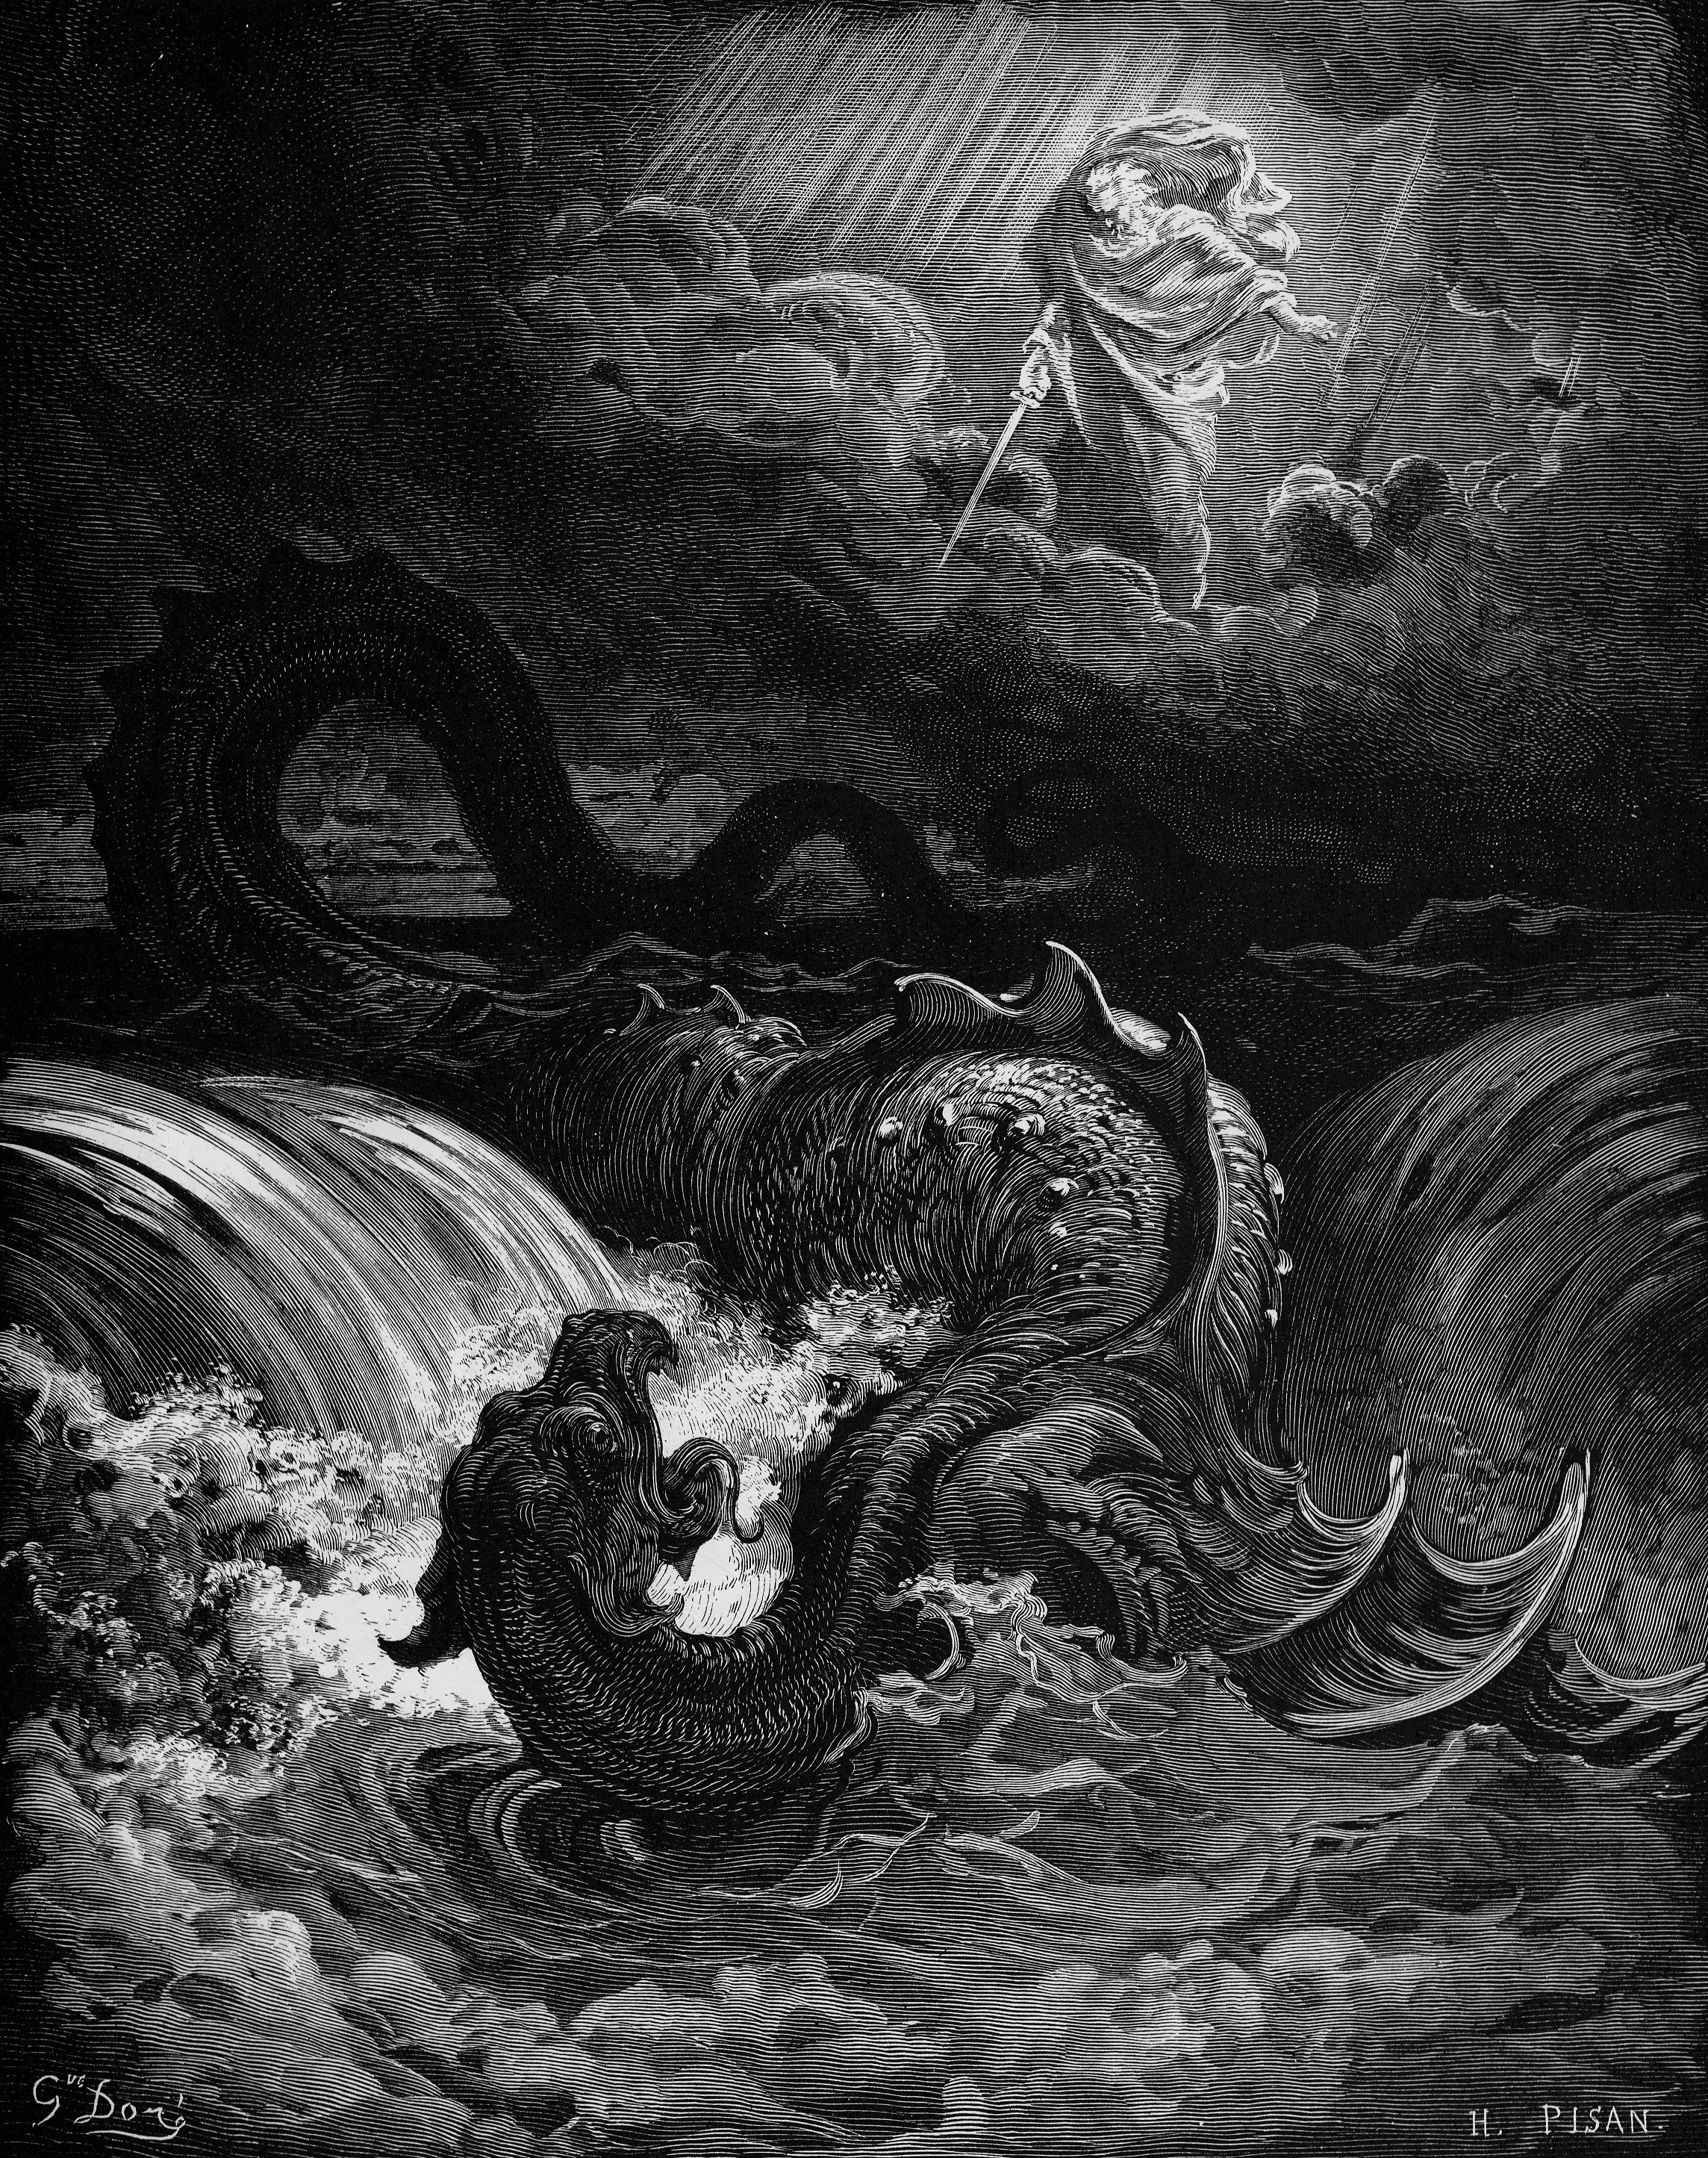 http://upload.wikimedia.org/wikipedia/commons/9/9d/Destruction_of_Leviathan.png